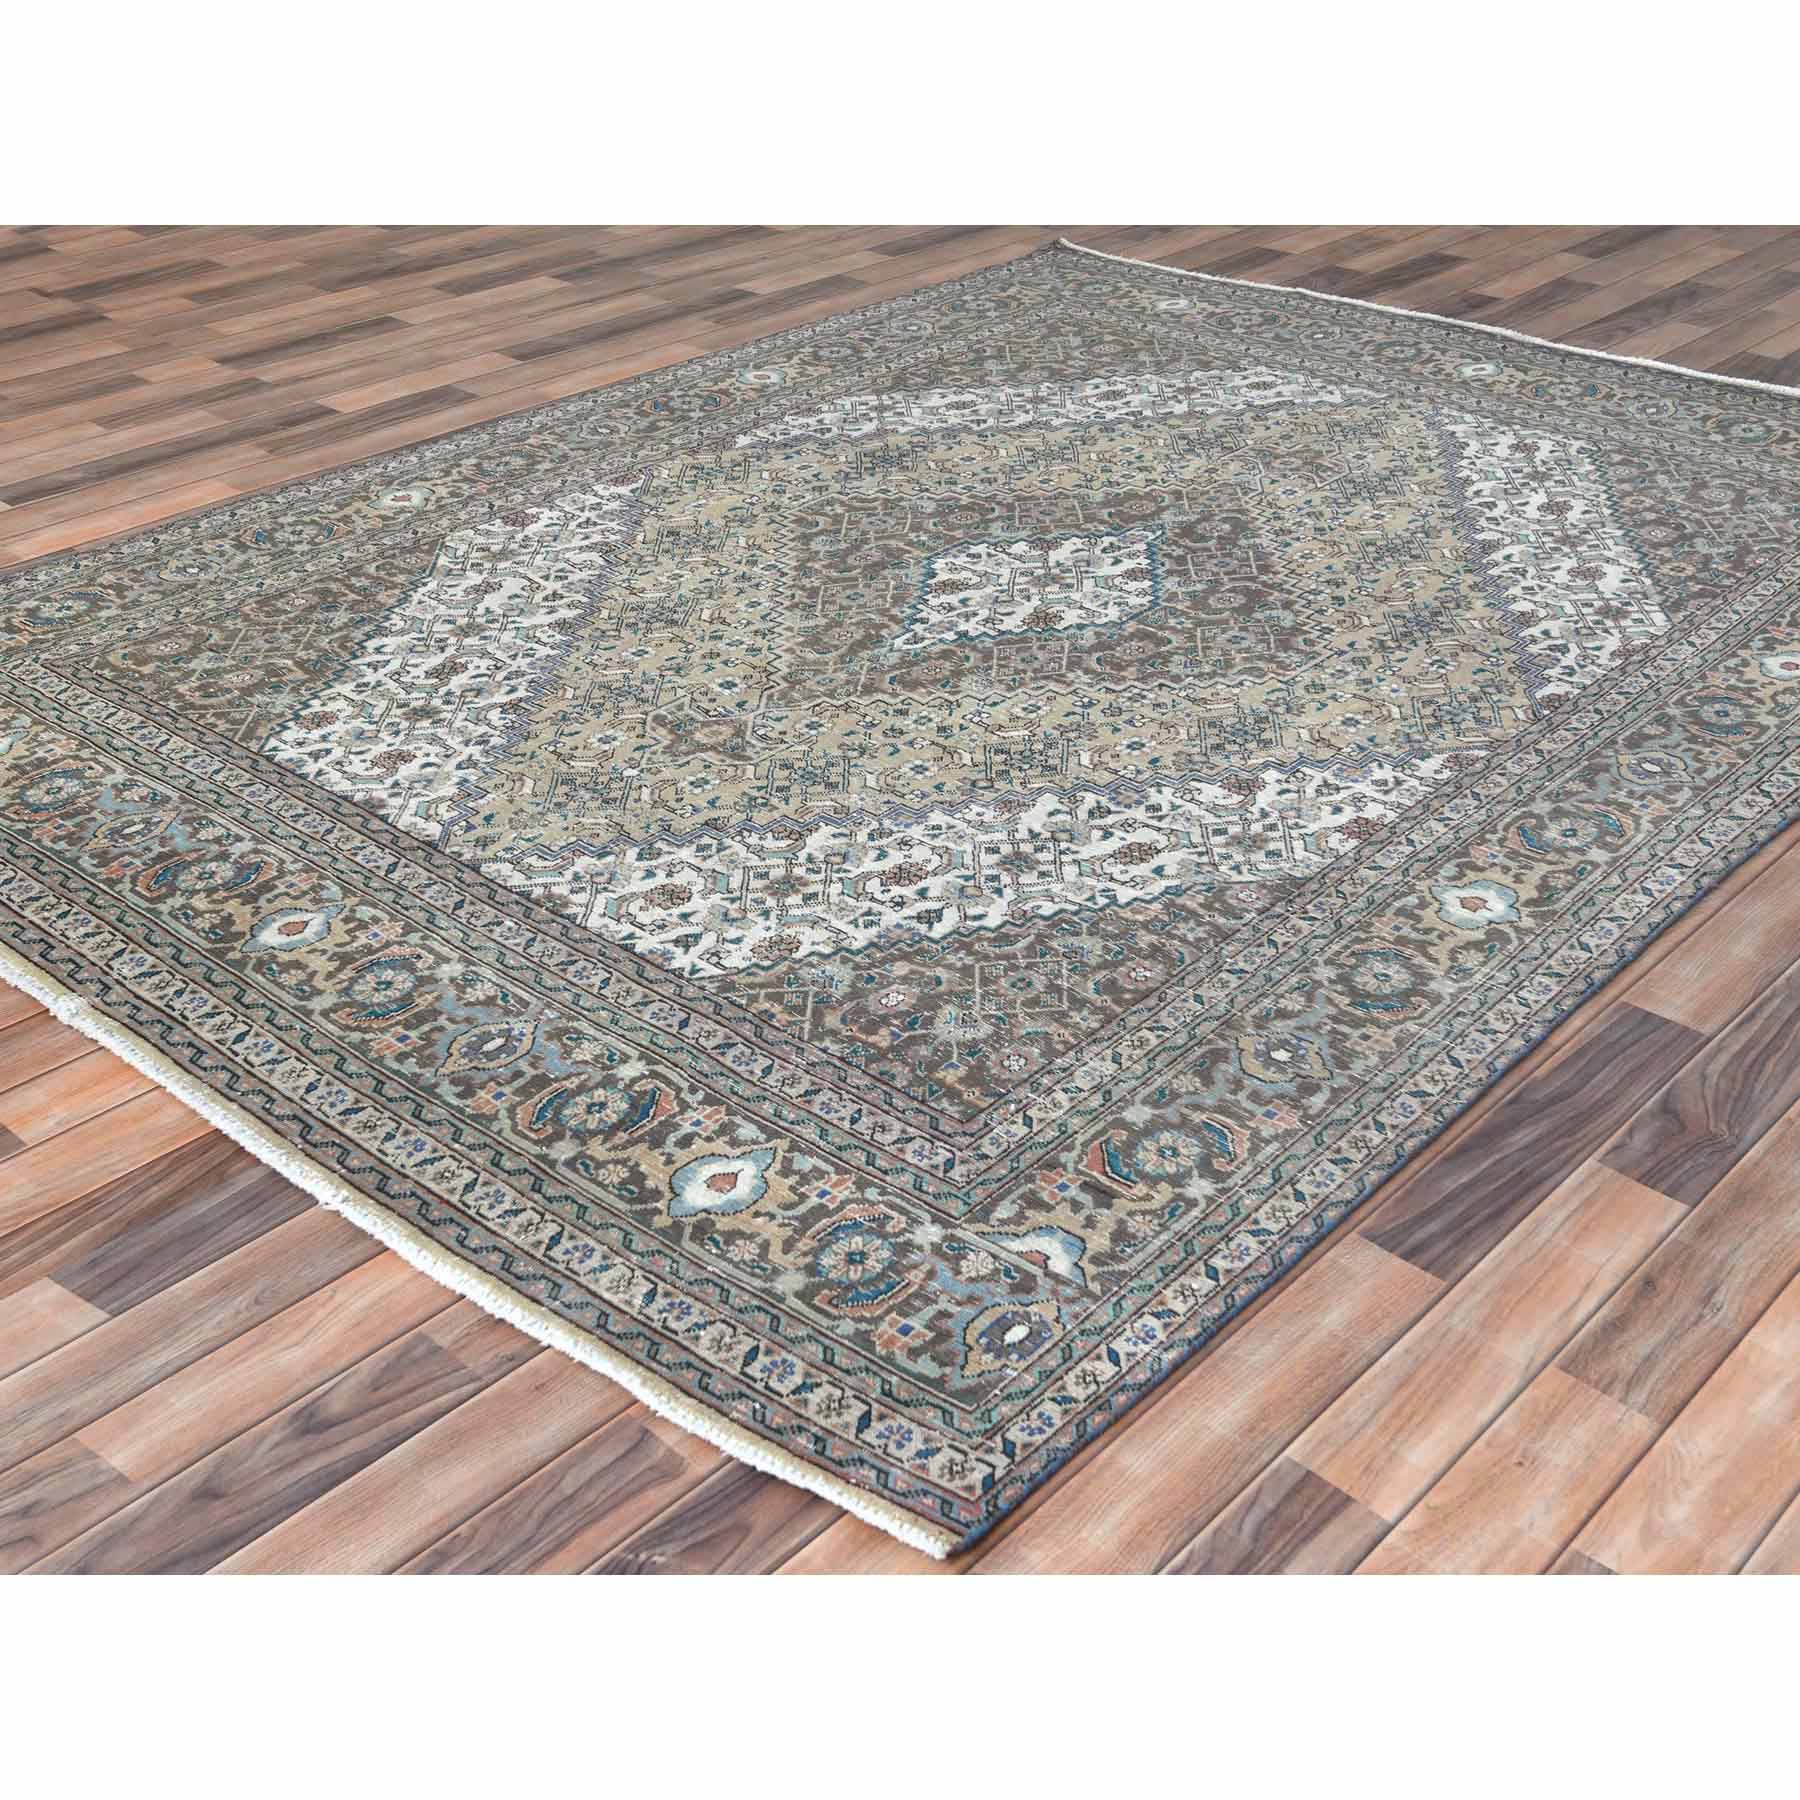 Overdyed-Vintage-Hand-Knotted-Rug-309945